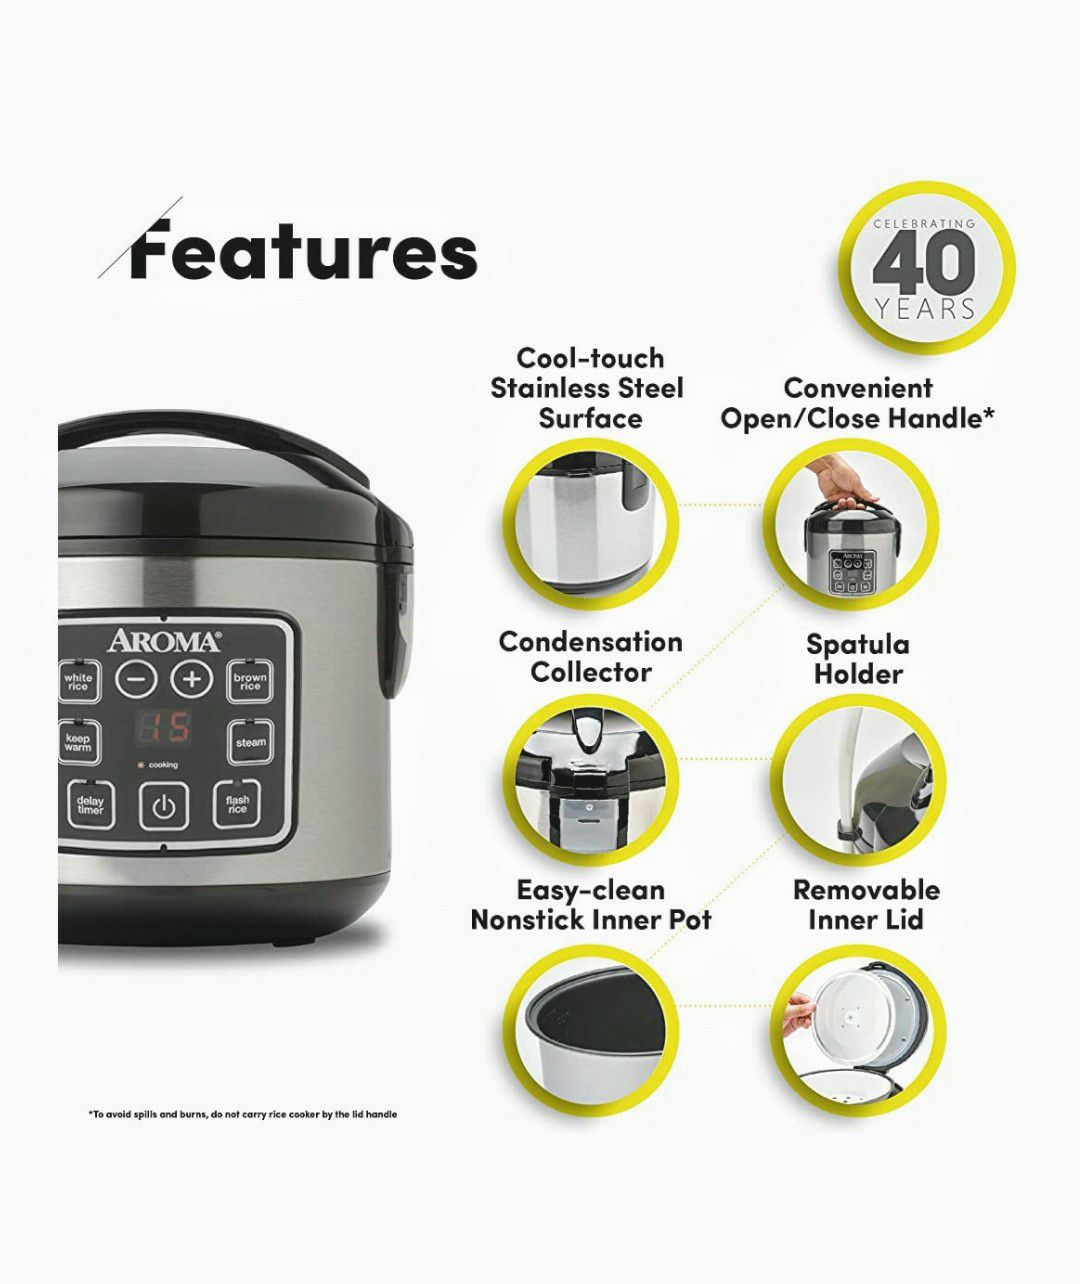 Aroma Housewares Rice Cooker Multicooker